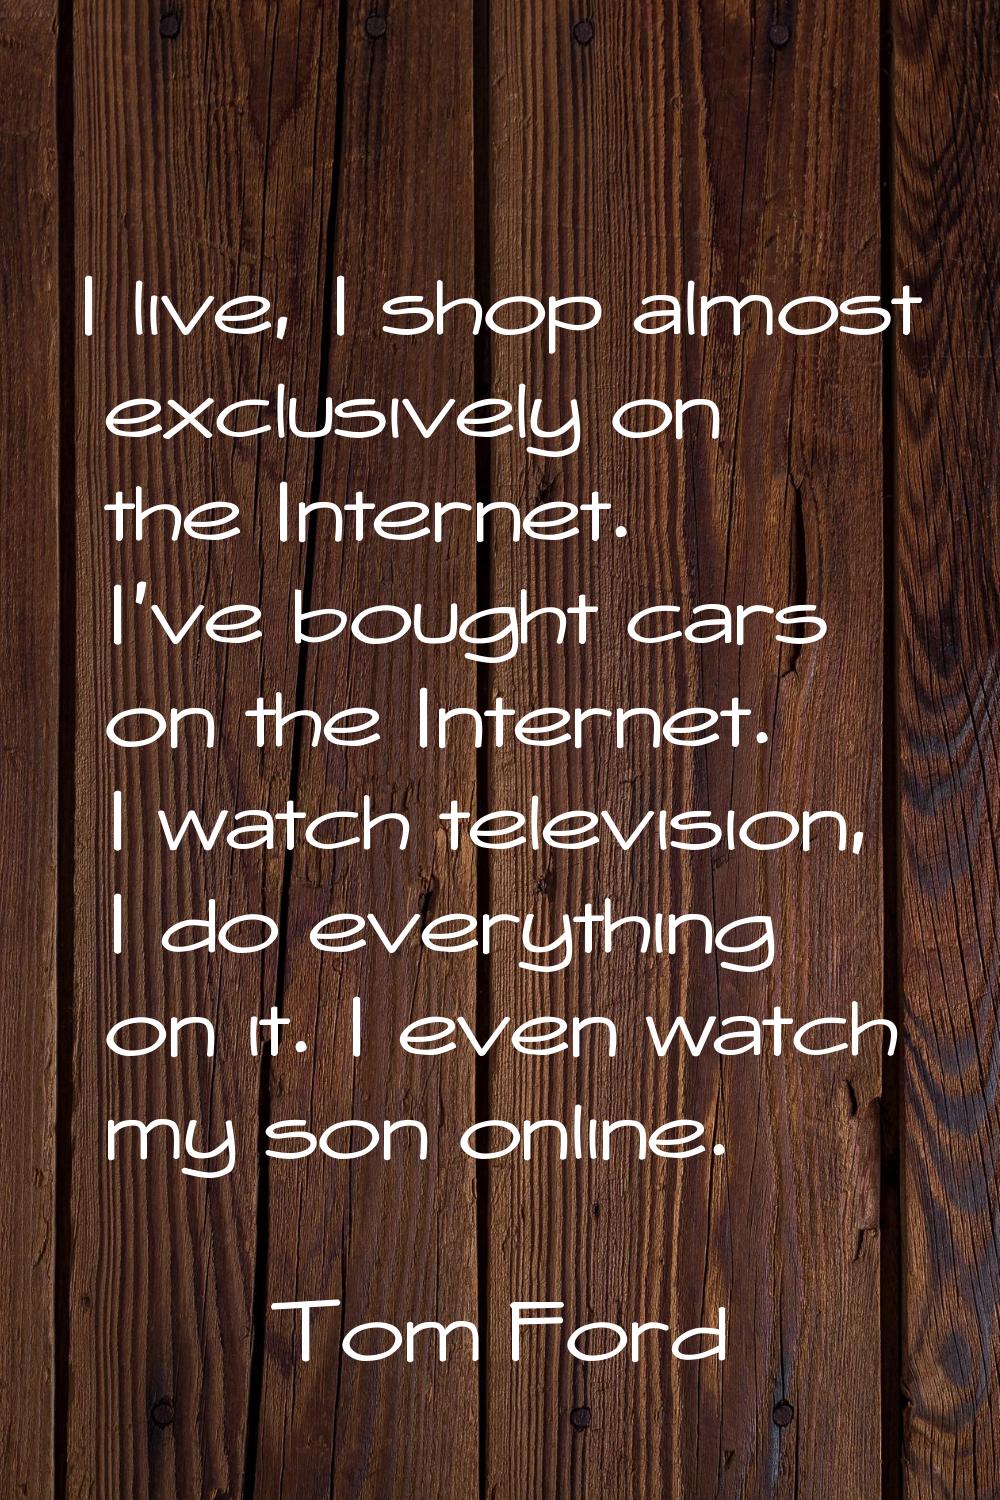 I live, I shop almost exclusively on the Internet. I've bought cars on the Internet. I watch televi